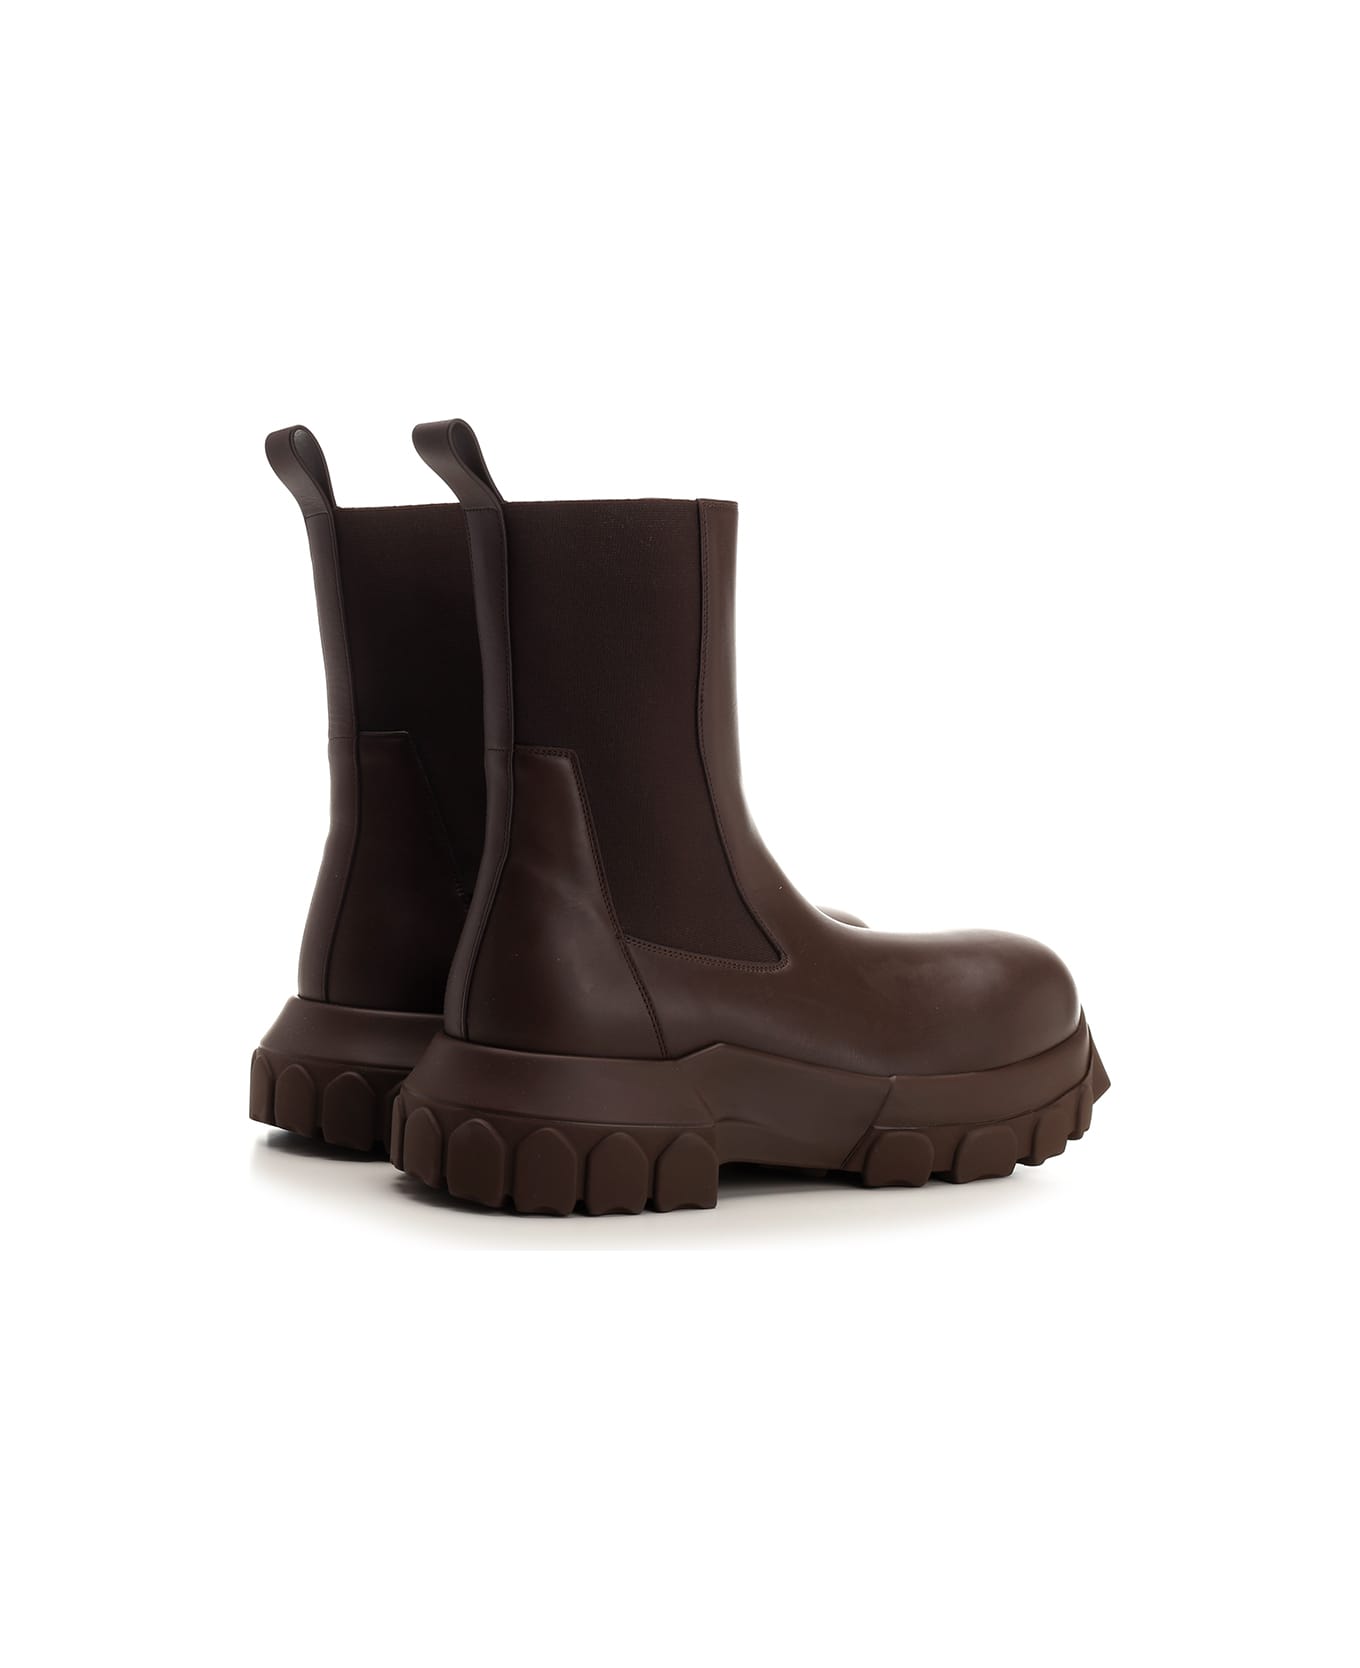 Rick Owens 'beatle Bozo' Ankle Boots - Brown ブーツ